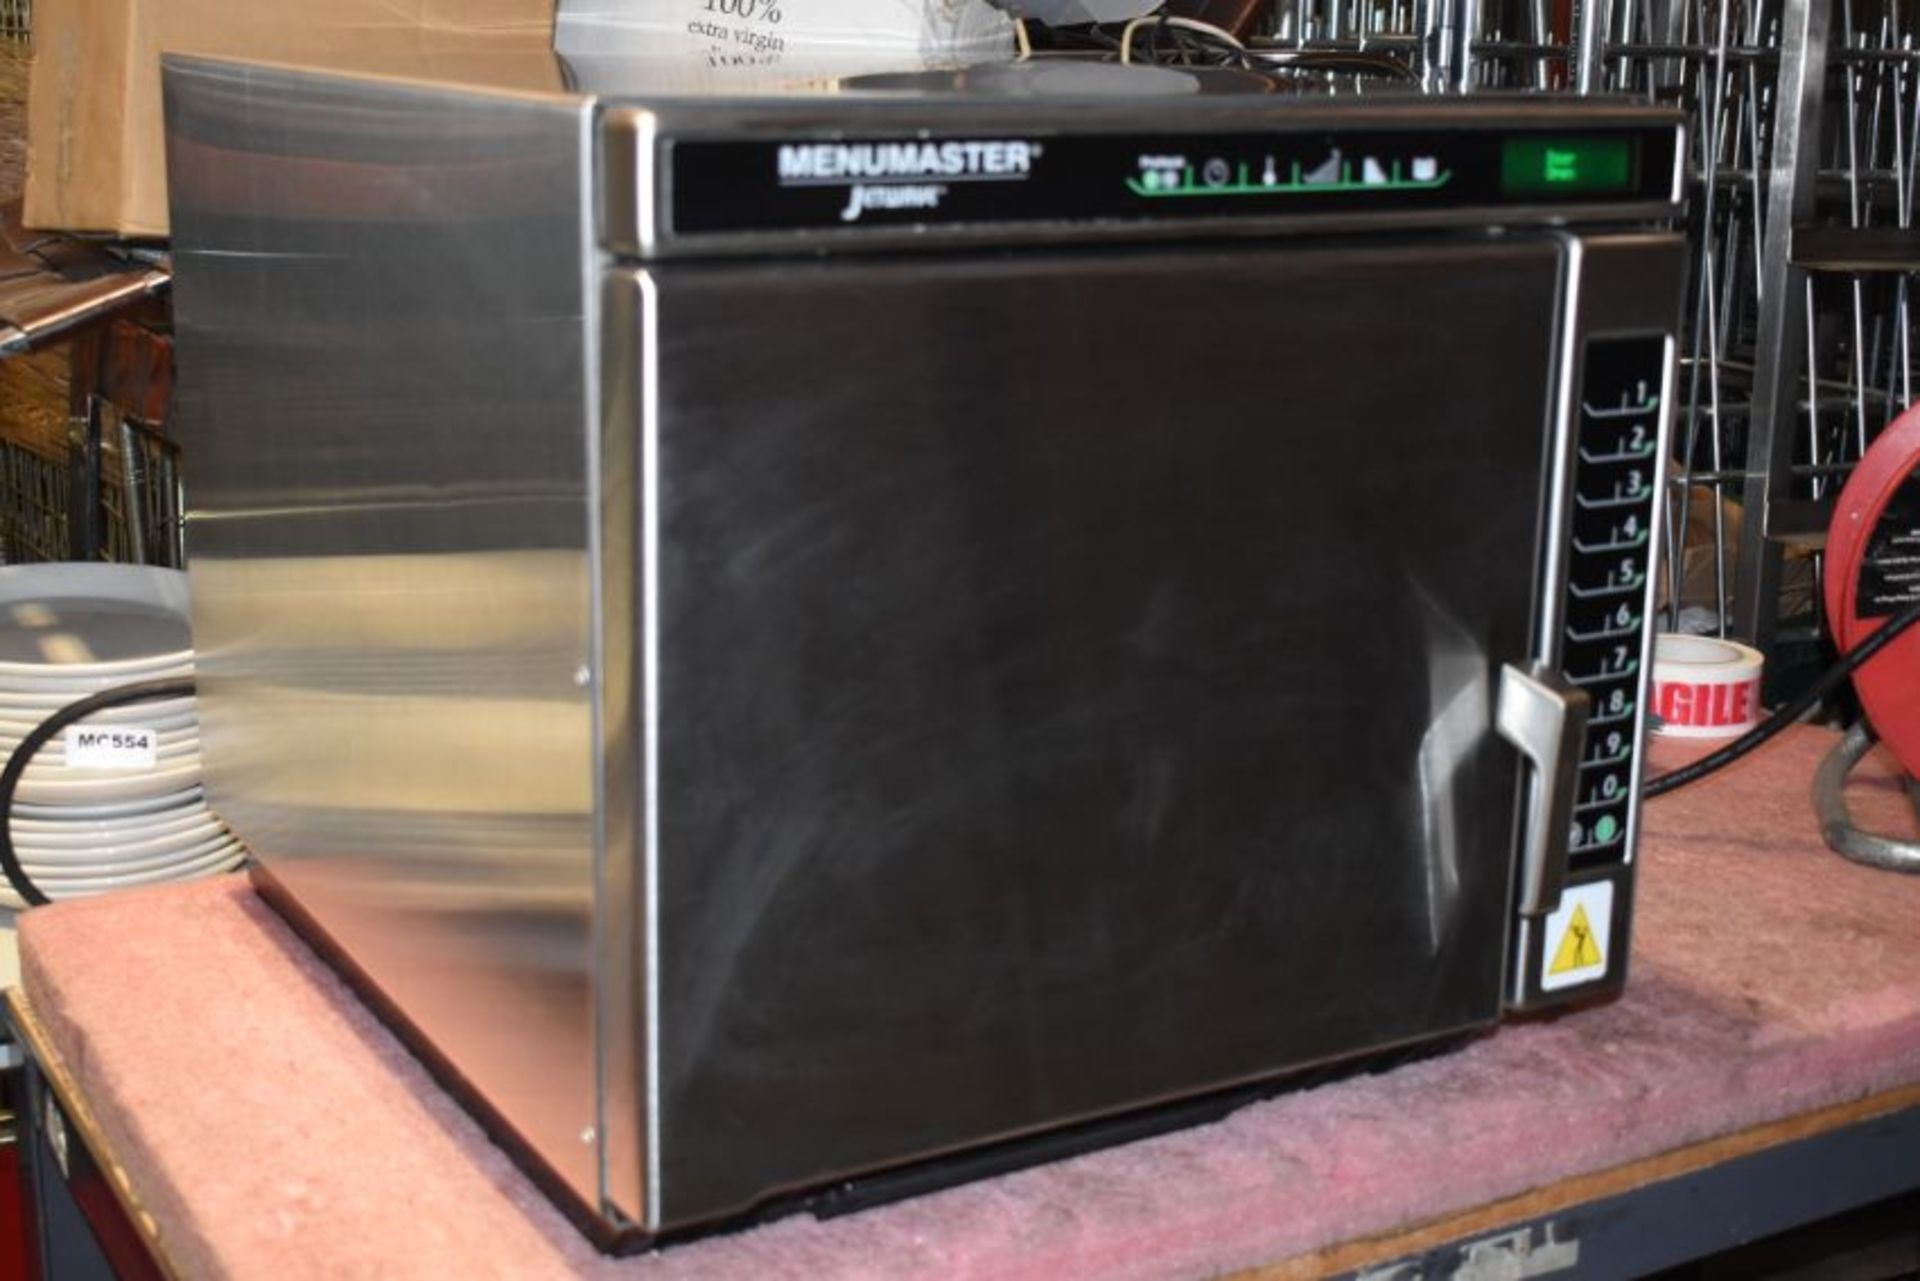 1 x Menumaster Jetwave JET514U High Speed Combination Microwave Oven - RRP £2,400 - CL232 - Ref: IN2 - Image 2 of 9